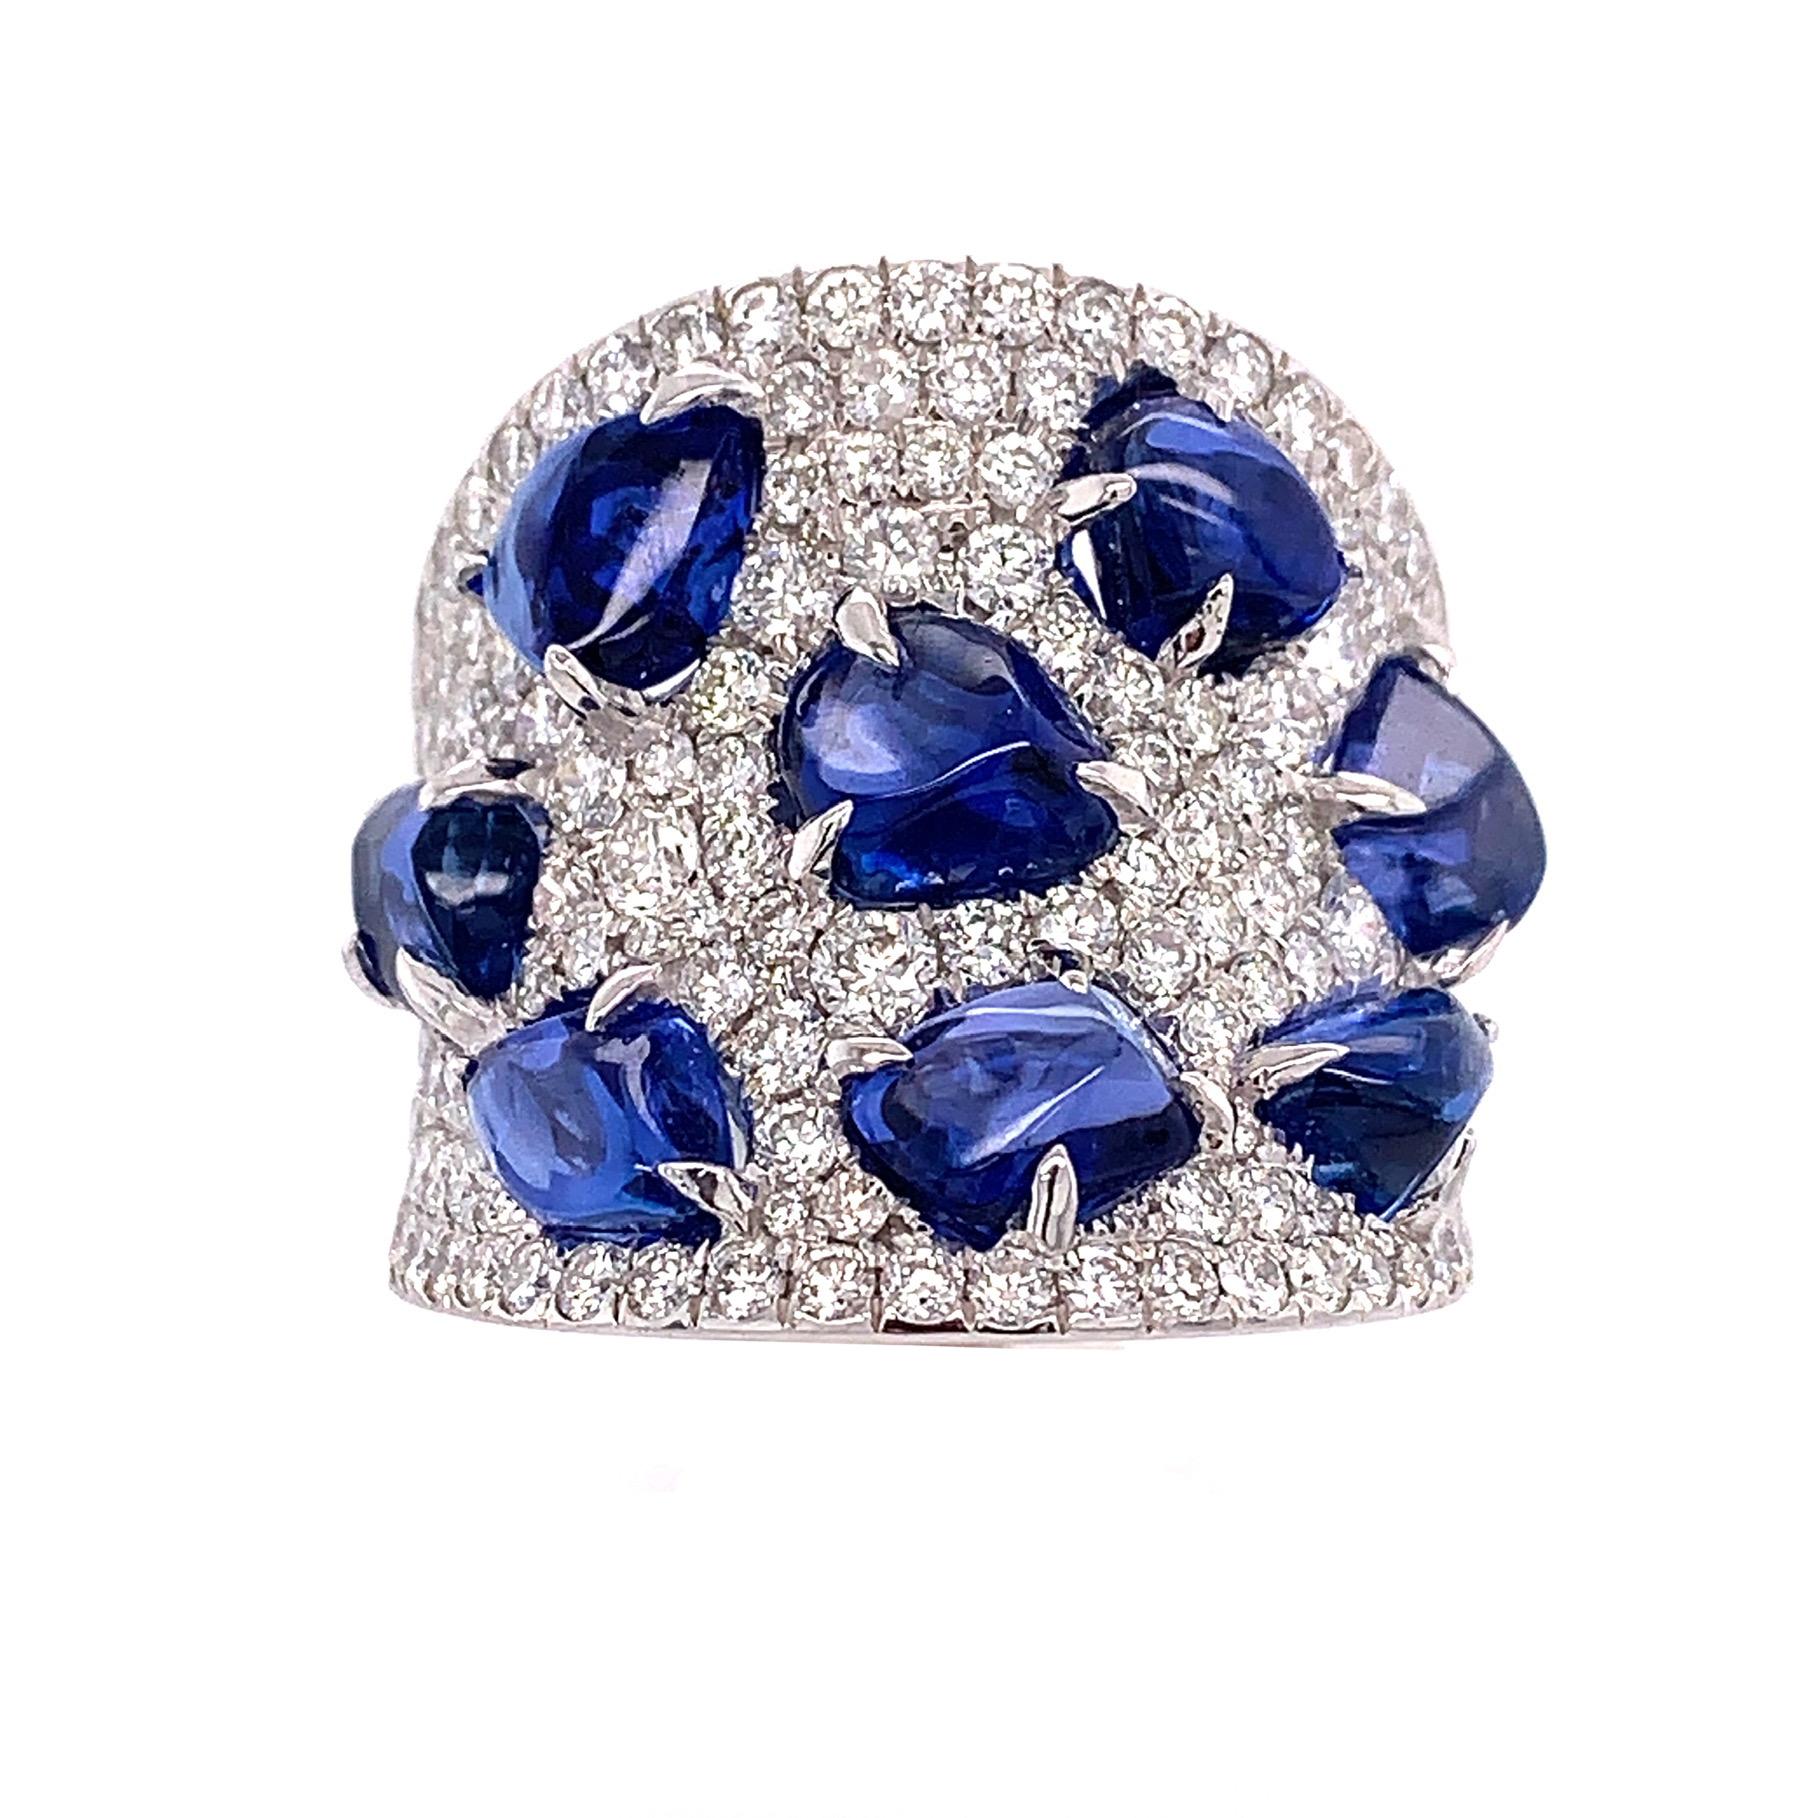 Midnight Blue Collection

Blue Sapphire nugget and Diamond pavé cocktail ring set in 18K white gold.

Sapphire: 9.62ct total weight.
Diamonds: 2.31ct total weight.
All diamonds are G-H/SI stones.